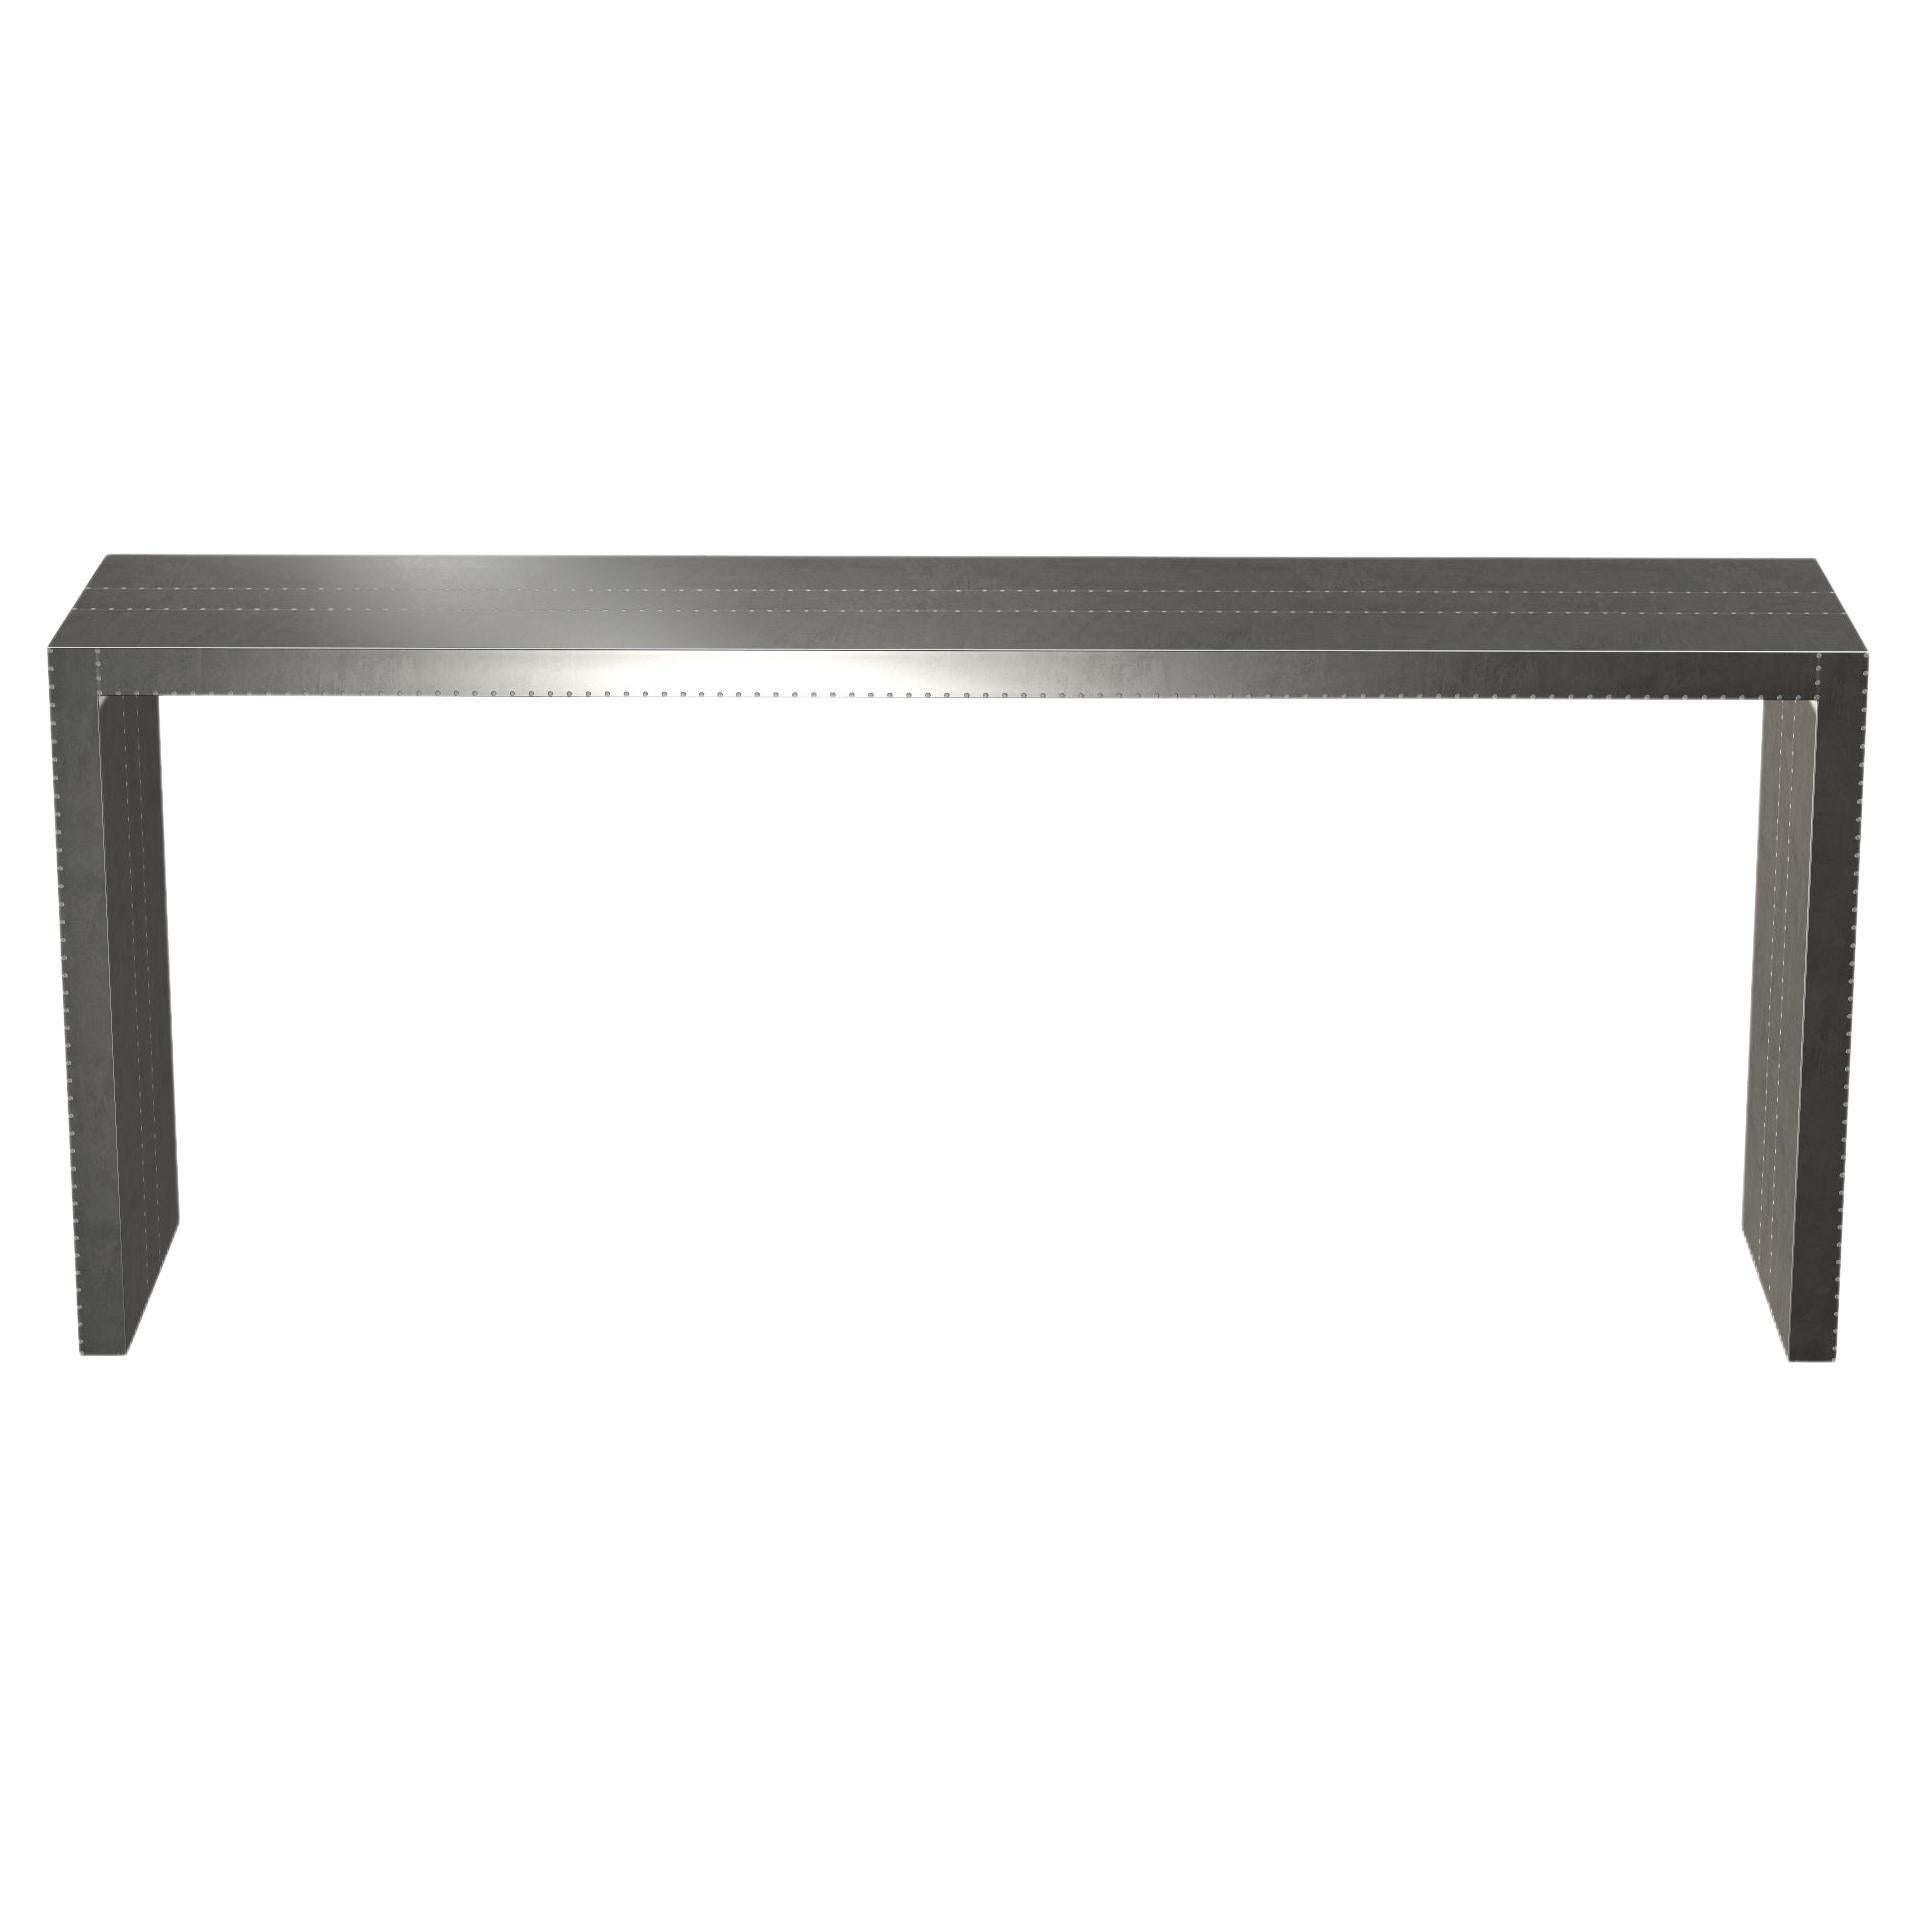 Art Deco Rectangular Console Tables Smooth White Bronze by Alison Spear